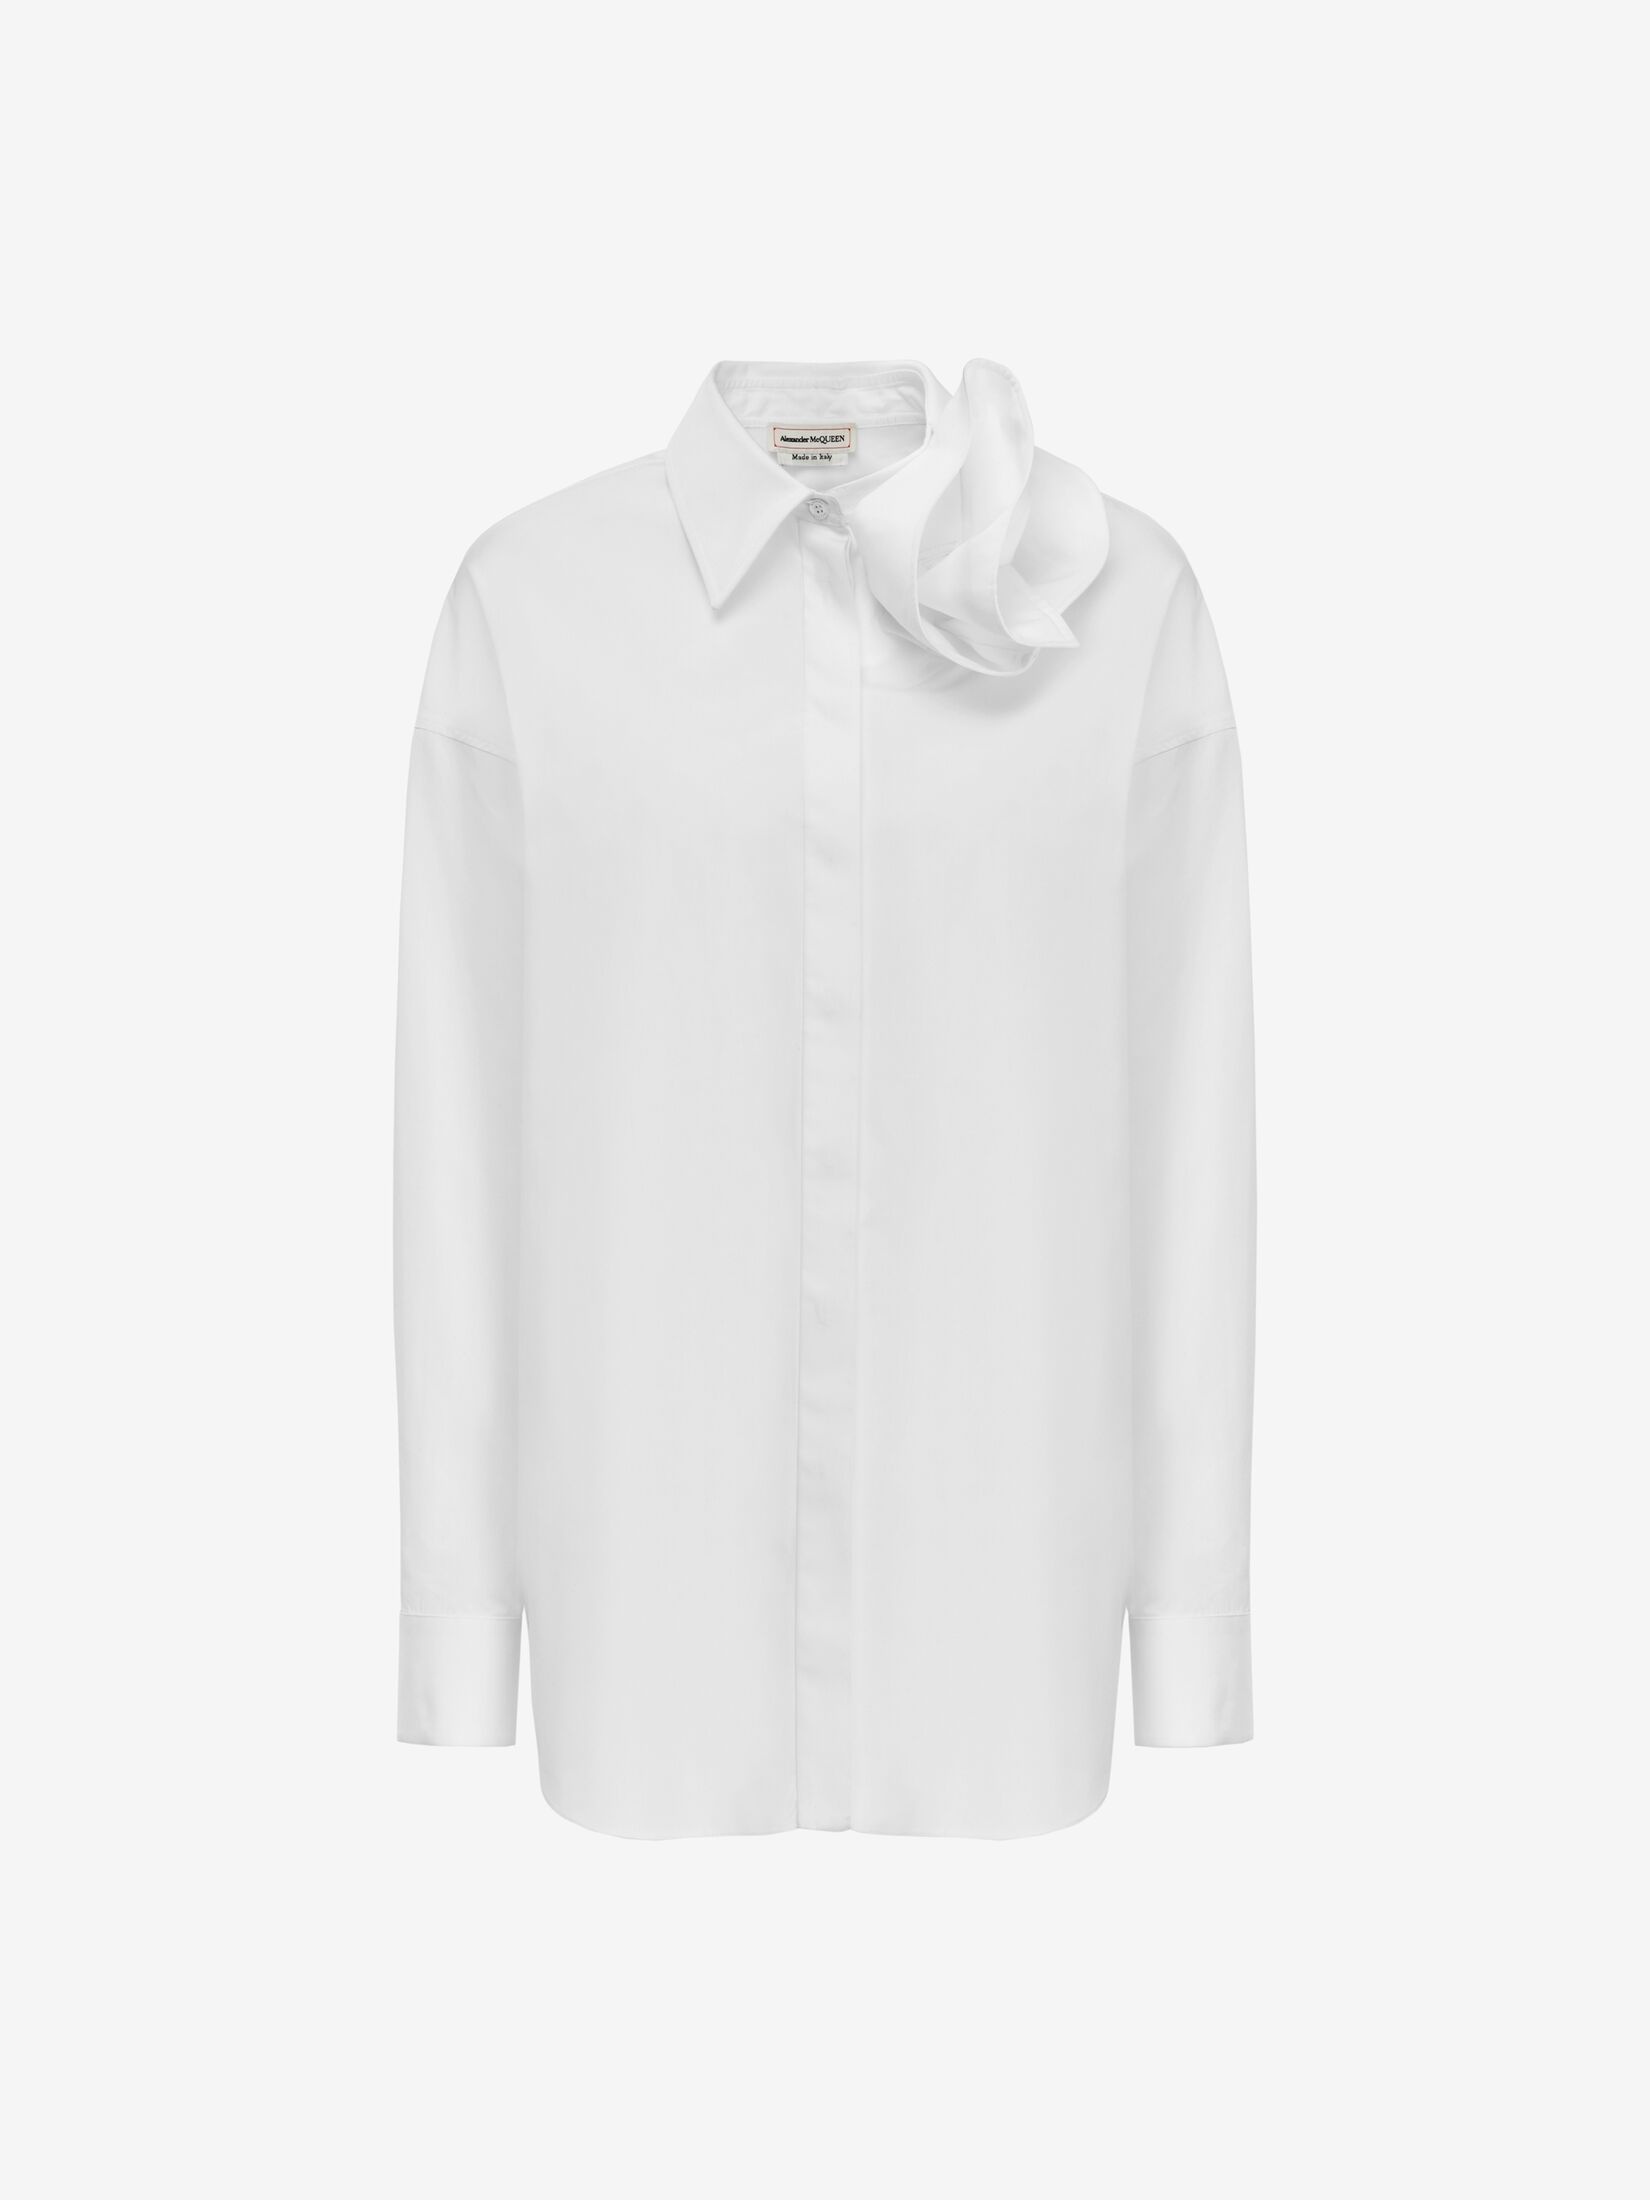 Women's Draped Orchid Shirt in Optical White - 1